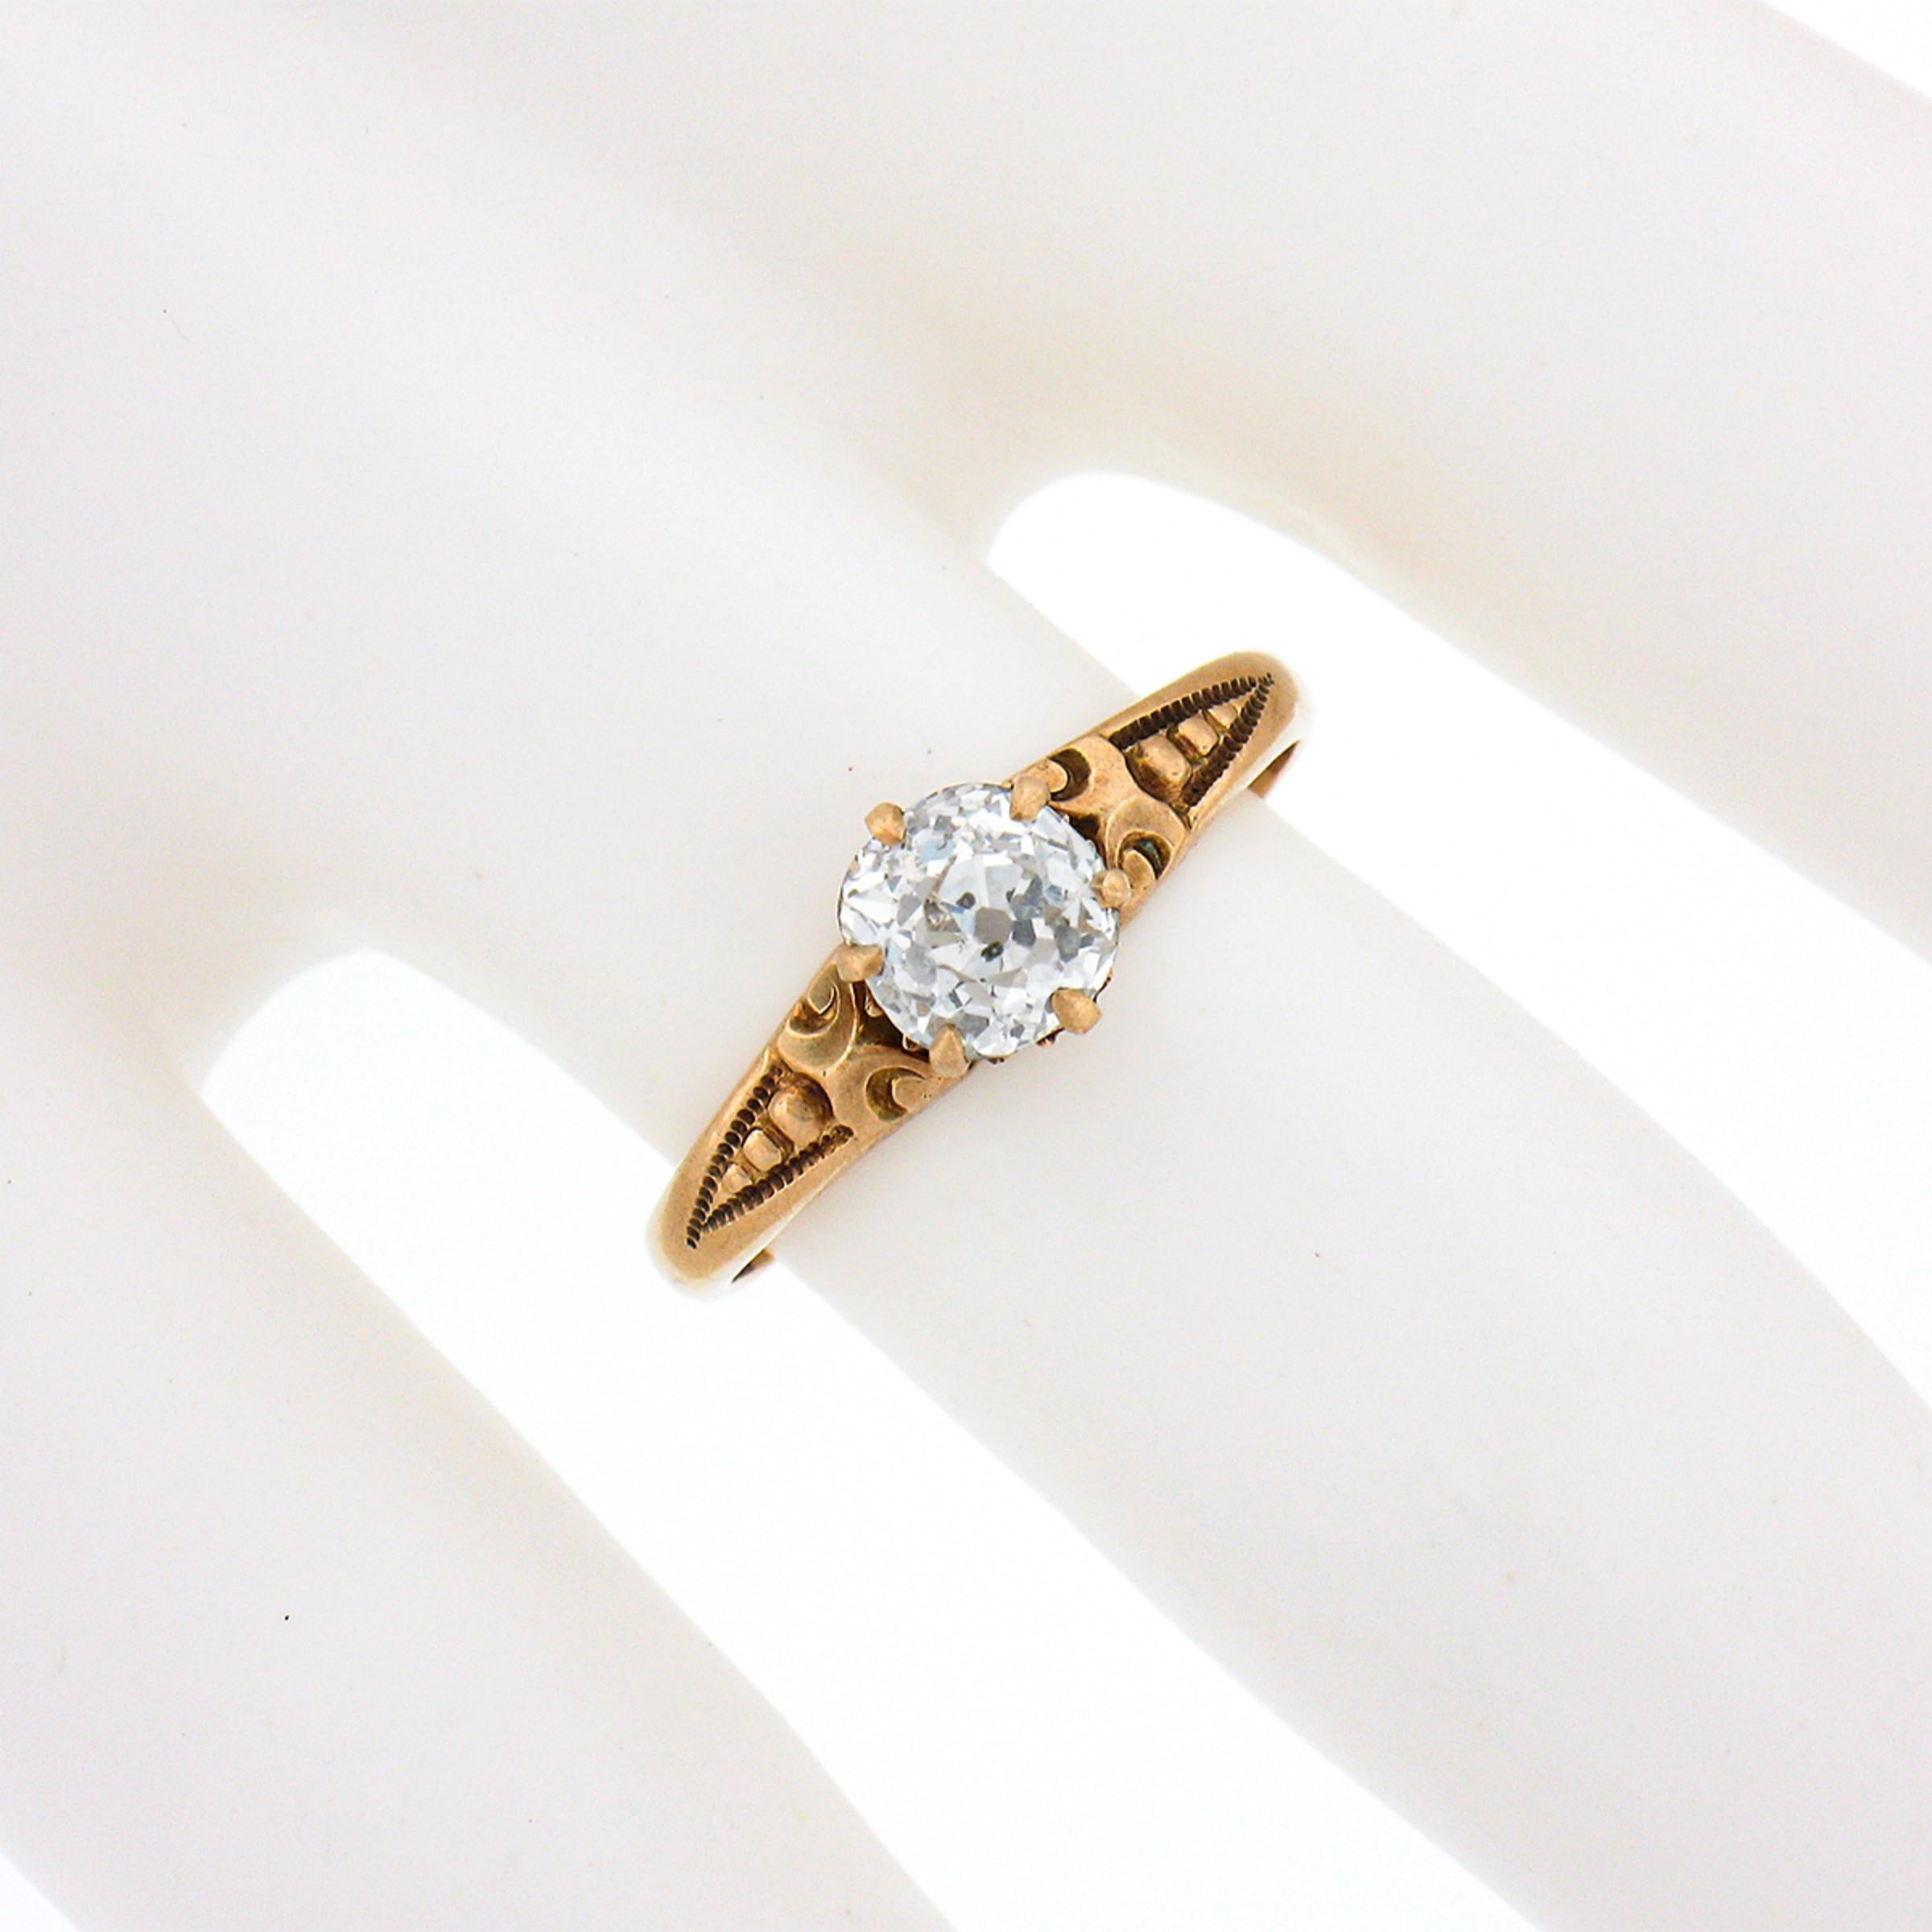 Antique Victorian 10k Gold 0.75ct GIA Old Mine Diamond Solitaire Engagement Ring In Good Condition For Sale In Montclair, NJ